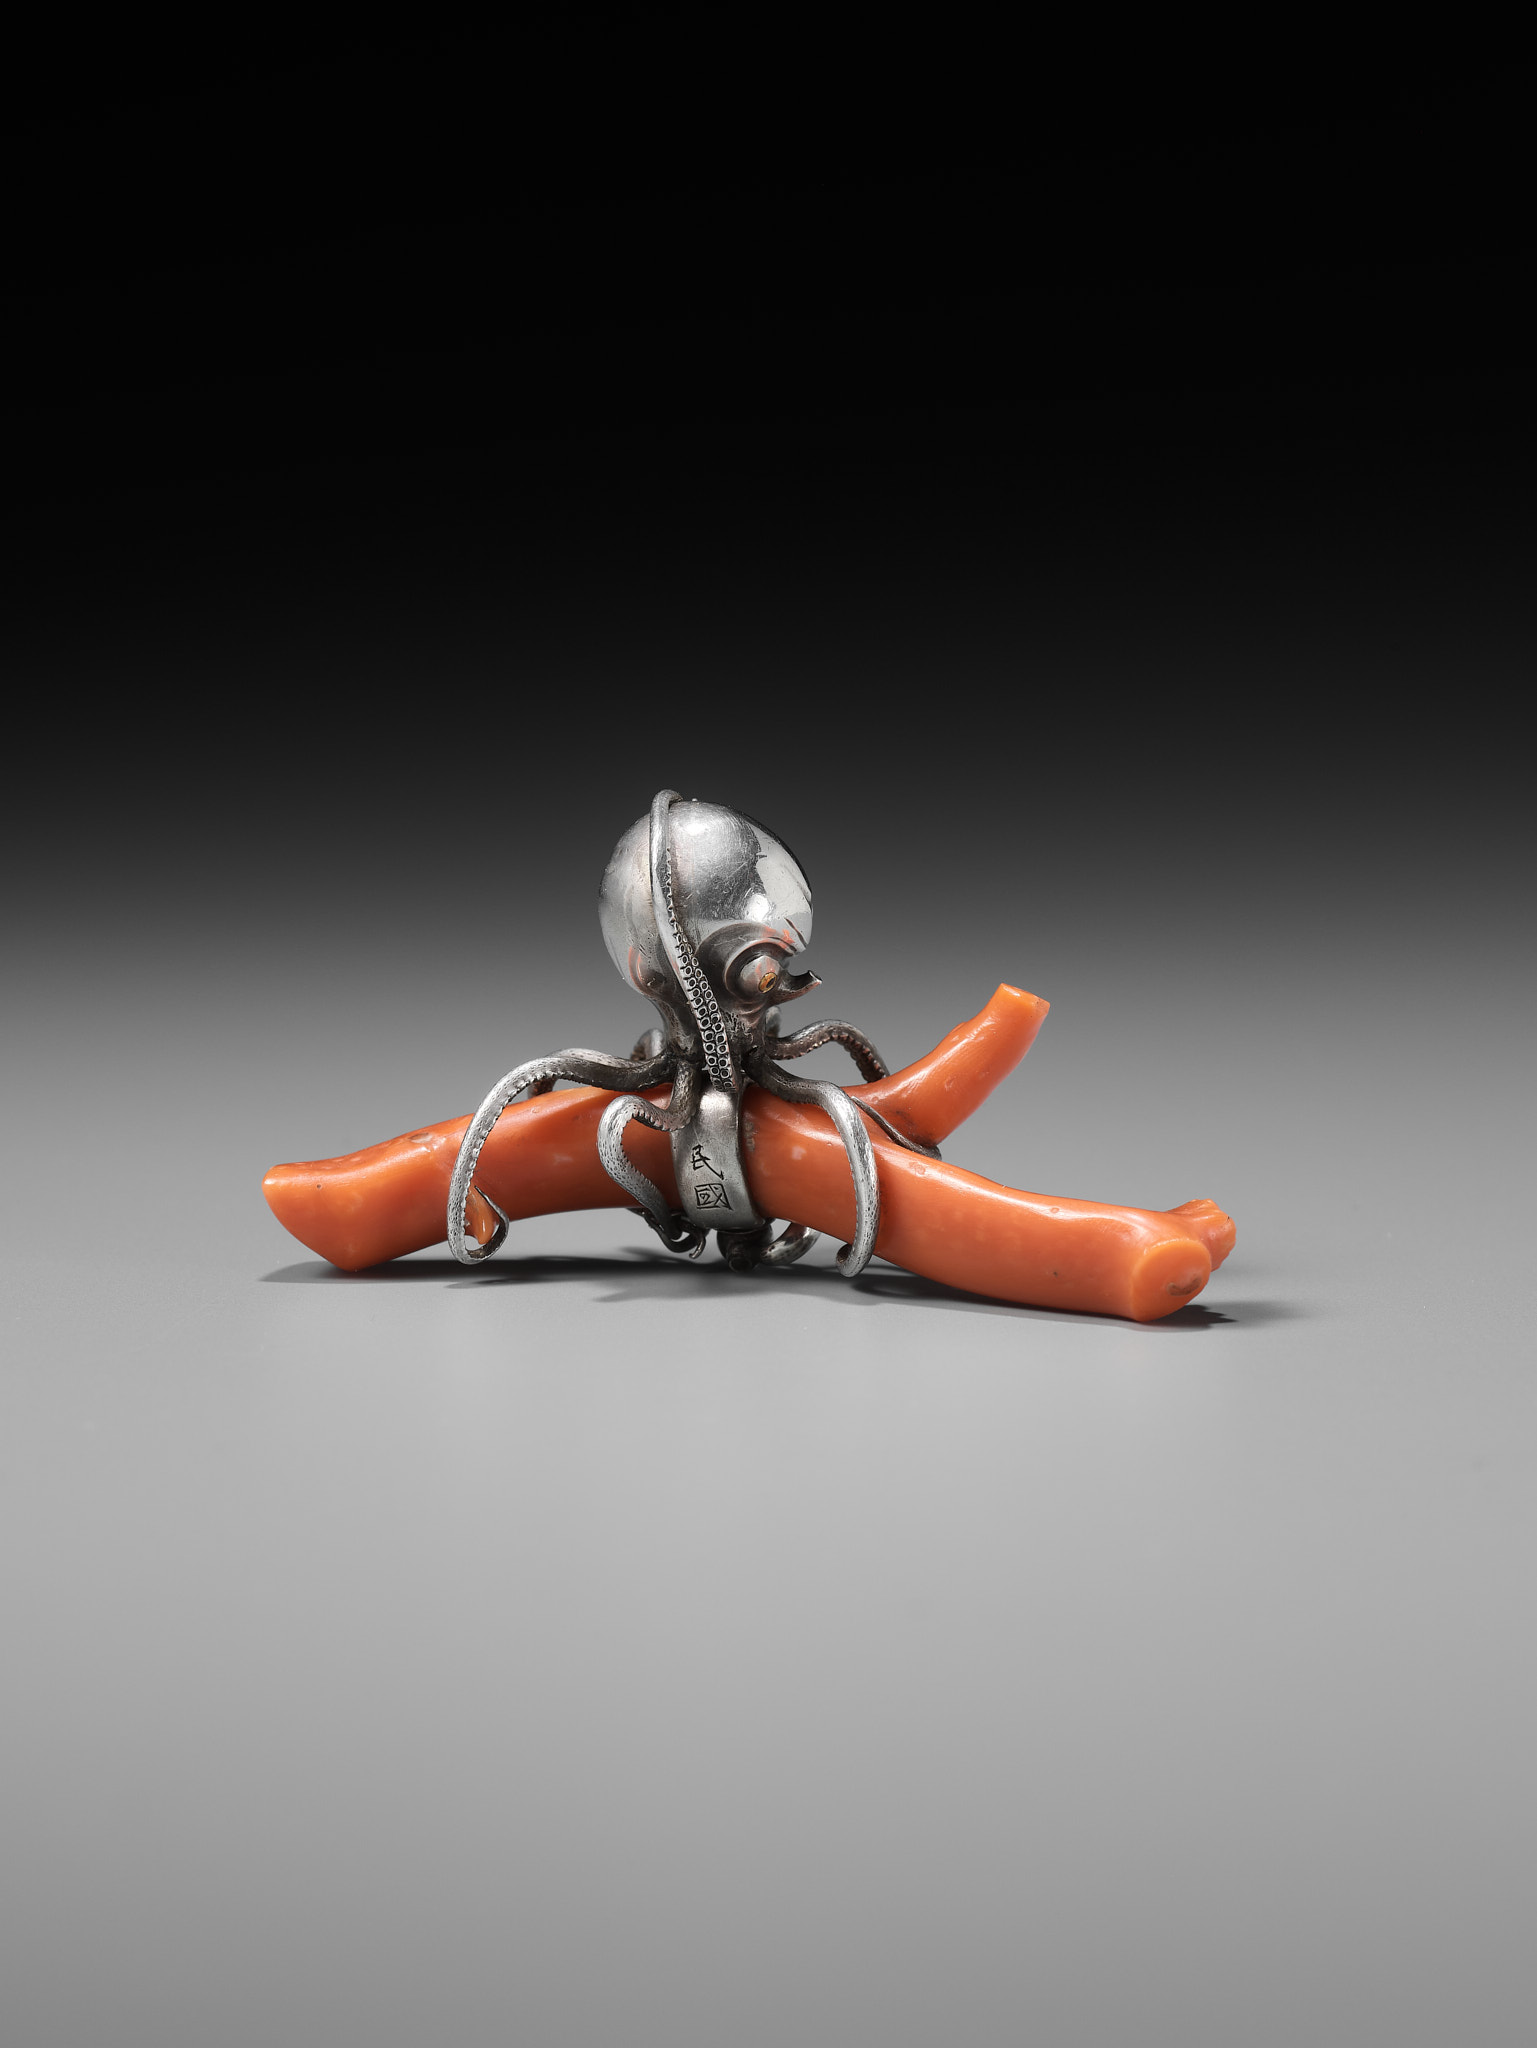 MINKOKU: A LARGE SILVER NETSUKE OF AN OCTOPUS GRASPING A PIECE OF CORAL - Image 4 of 14